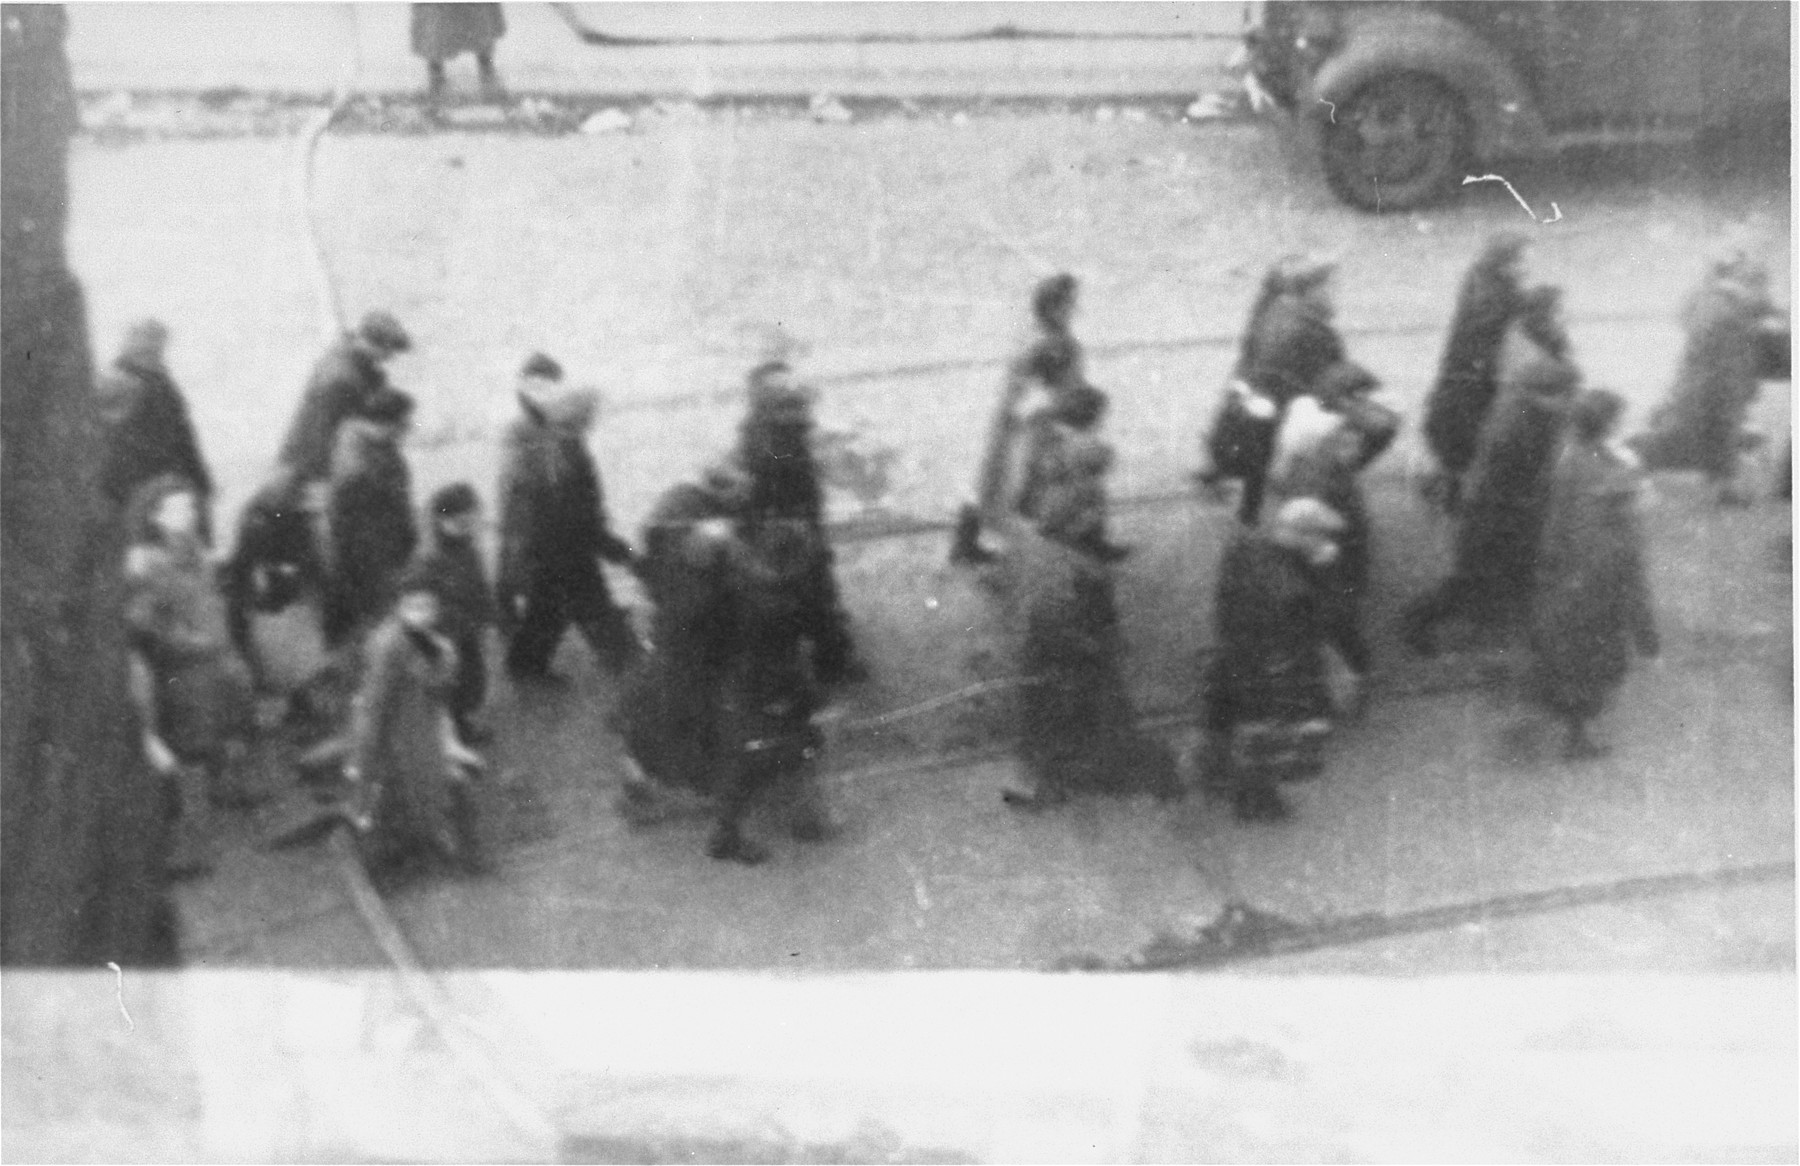 Jews captured by the SS during the suppression of the Warsaw ghetto uprising march past the St. Zofia hospital down Nowolipie Street towards the Umschlagplatz for deportation.